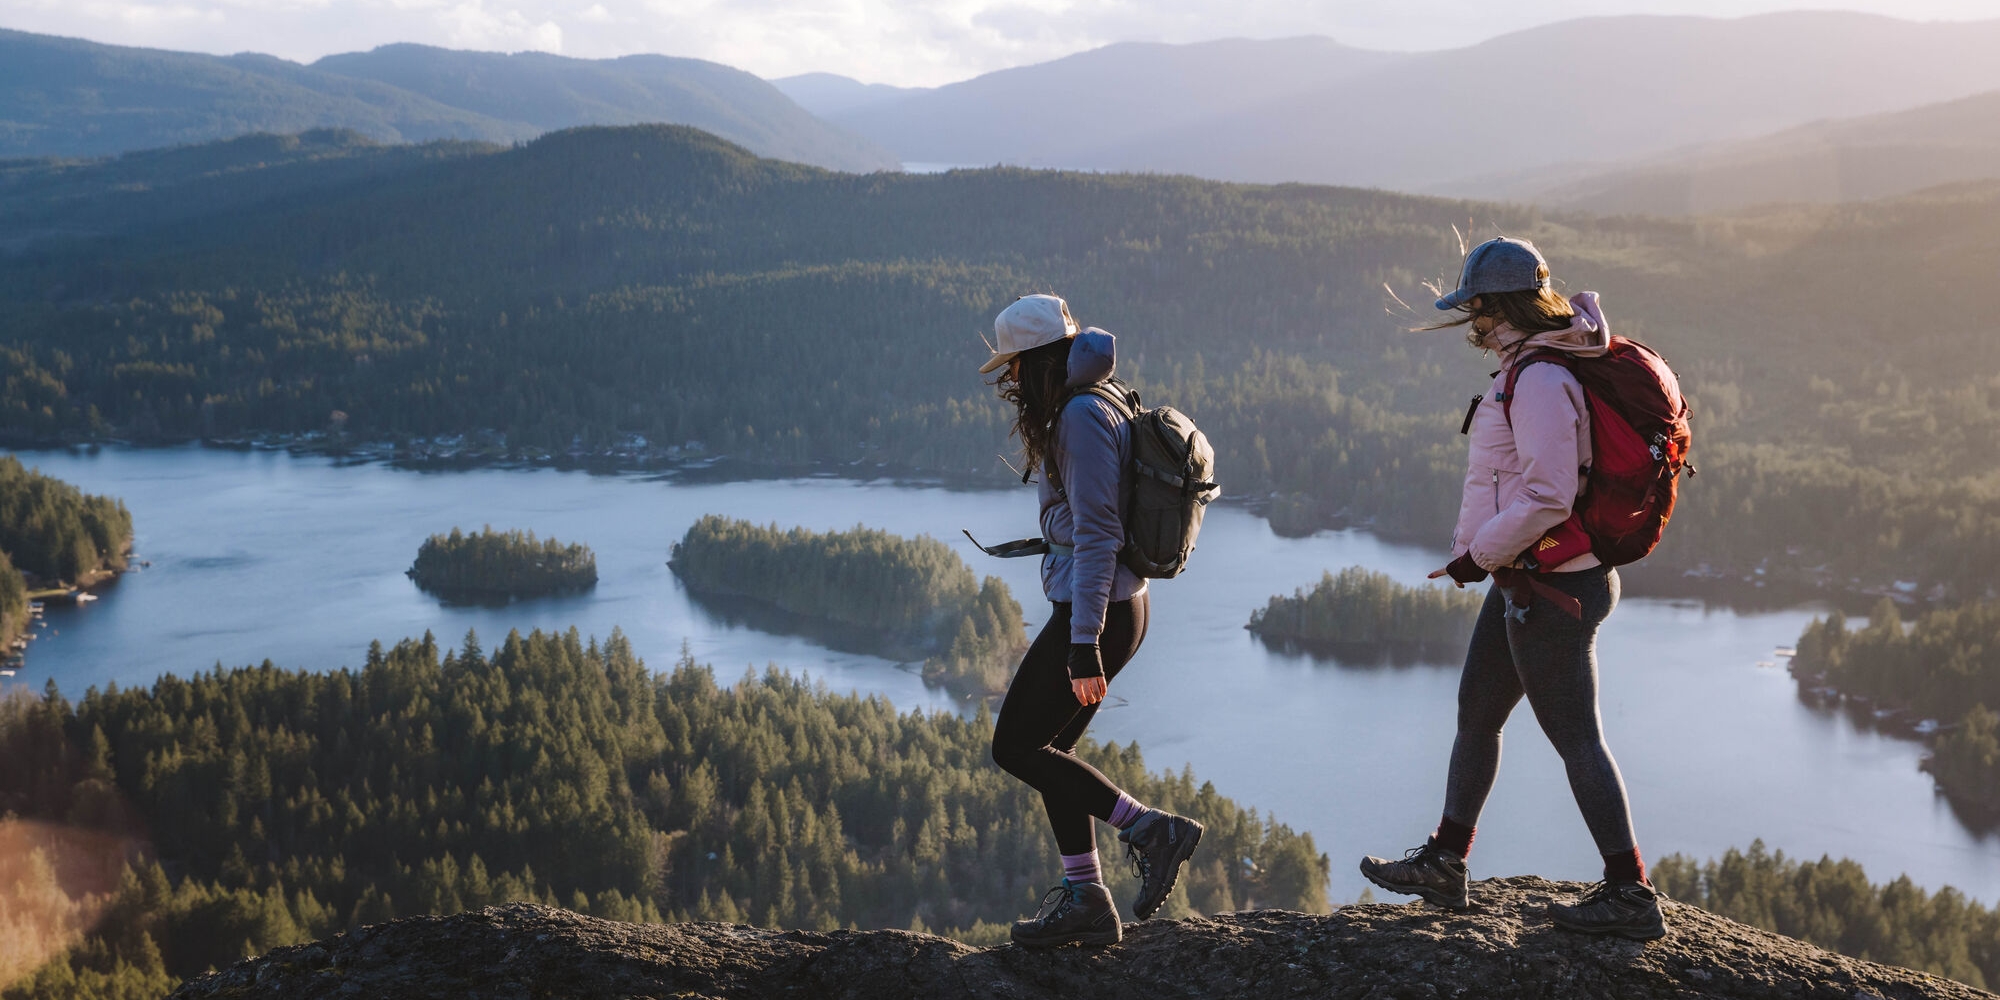 Two women wearing baseball caps and backpacks, walk along a rocky mountaintop overlooking forested hills with a narrow body of water in the middle of the frame containing a few forested islets